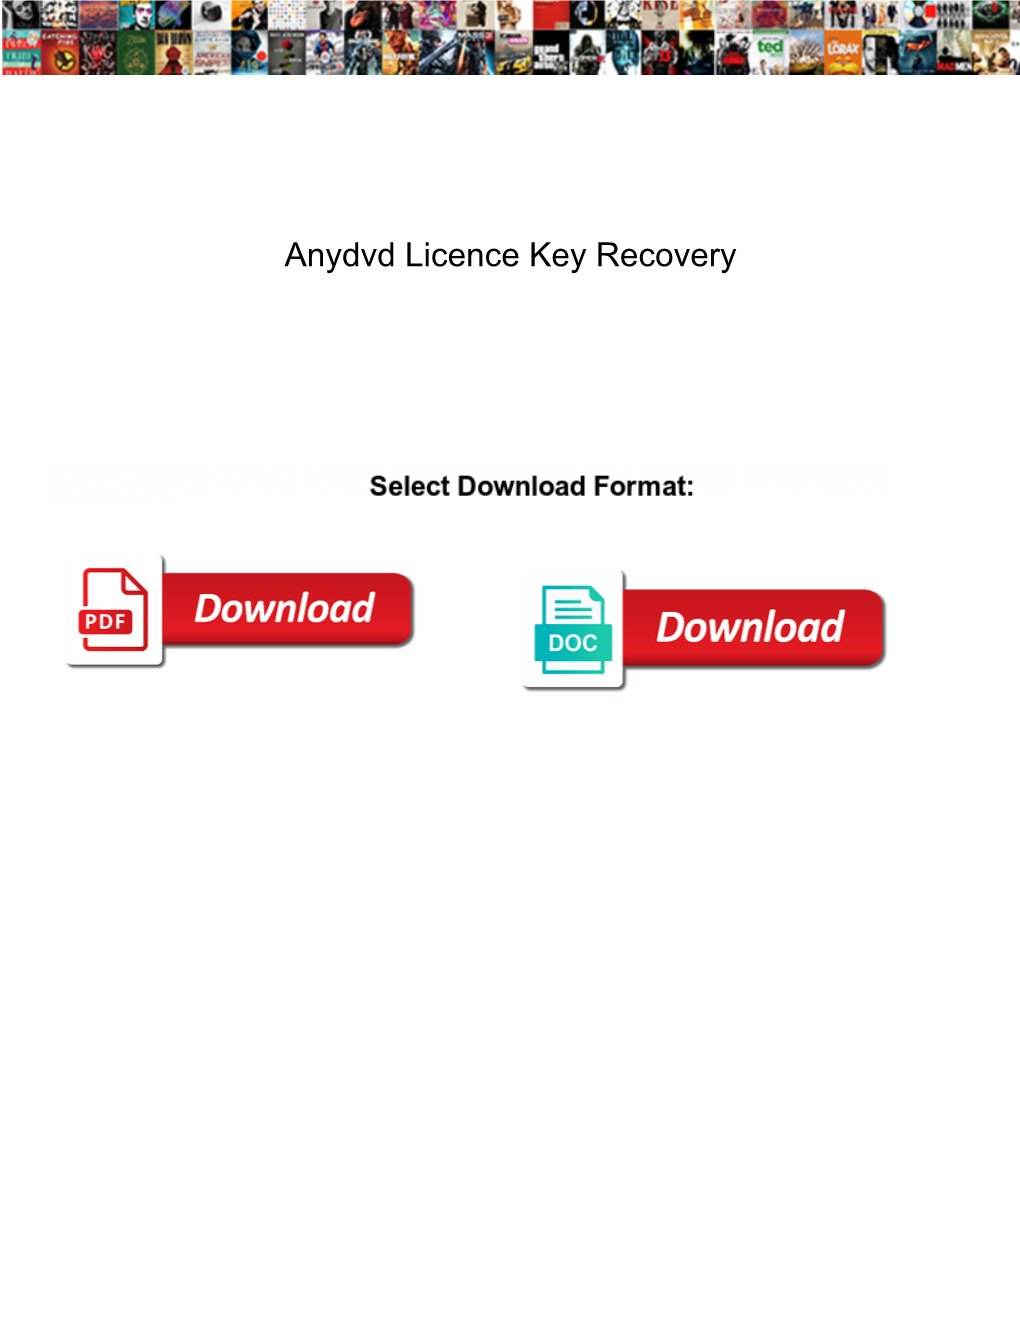 Anydvd Licence Key Recovery